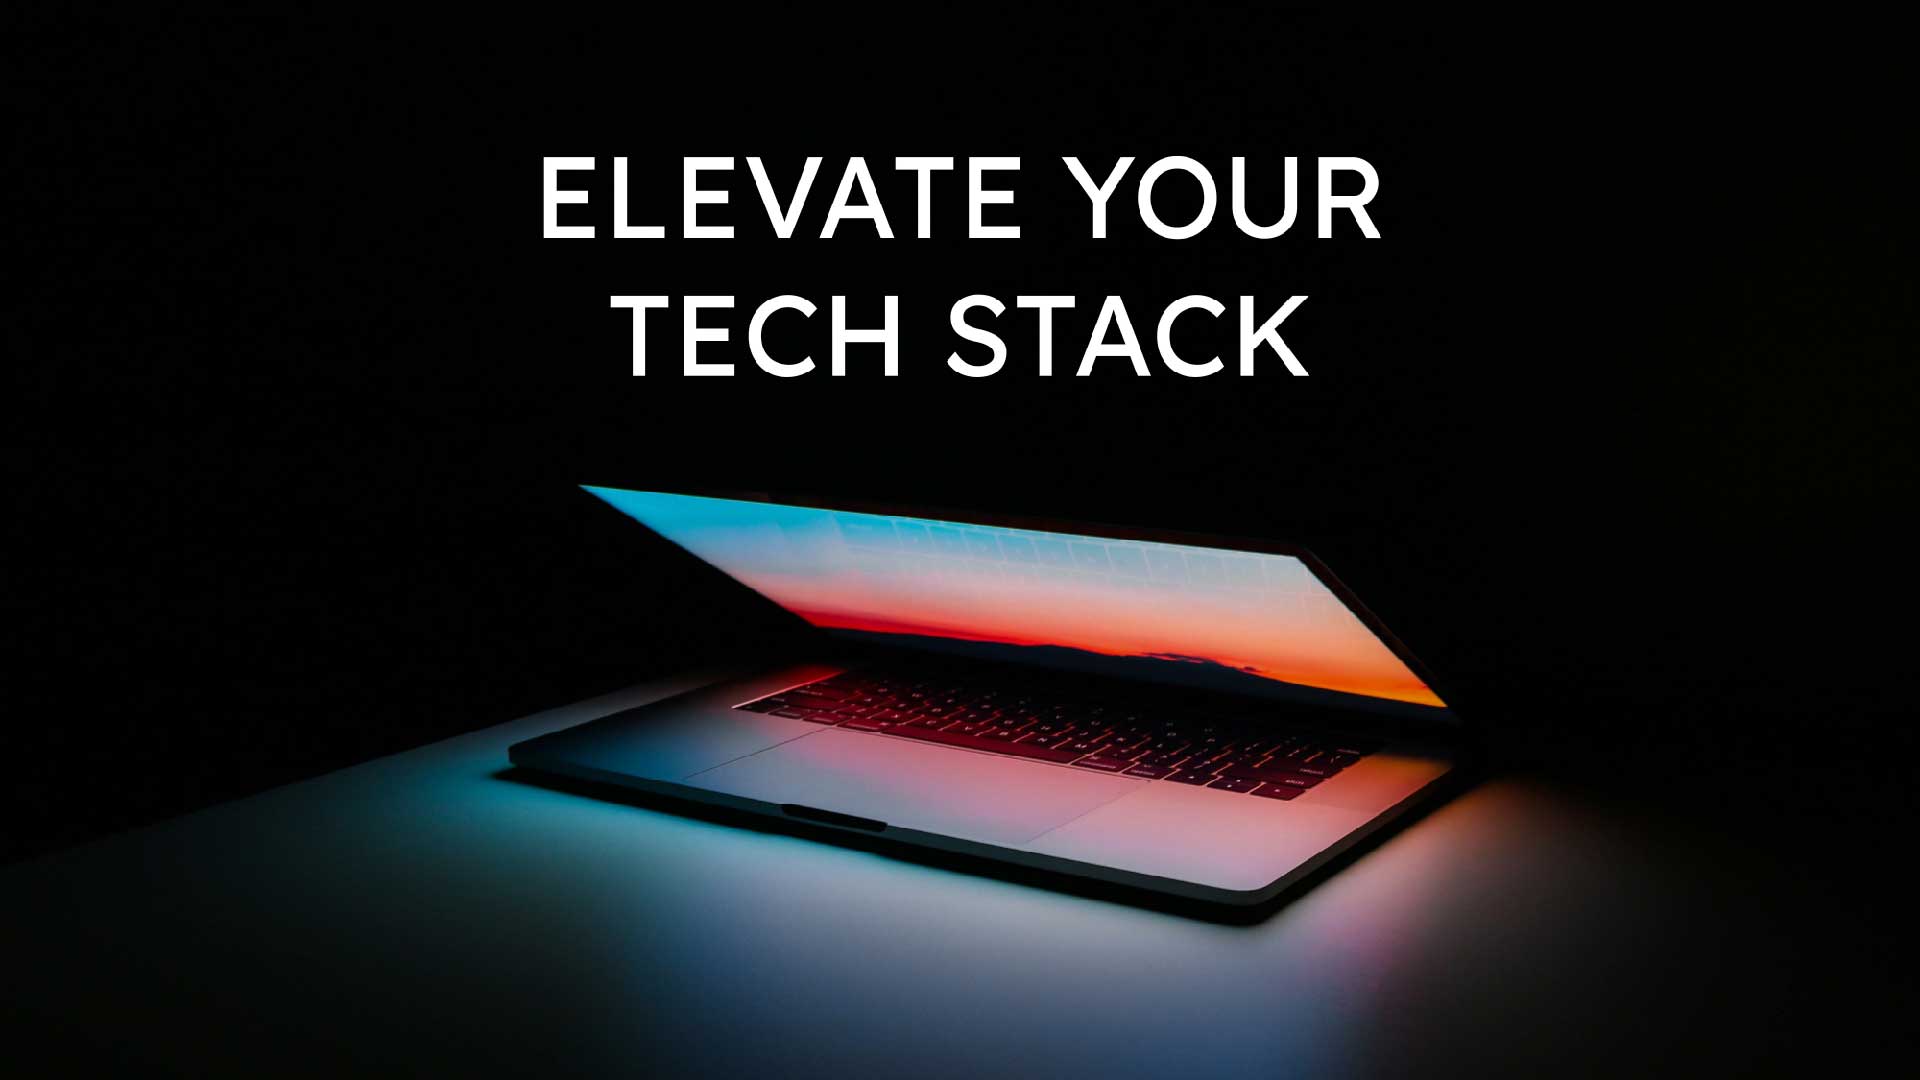 Elevate Your Tech Stack